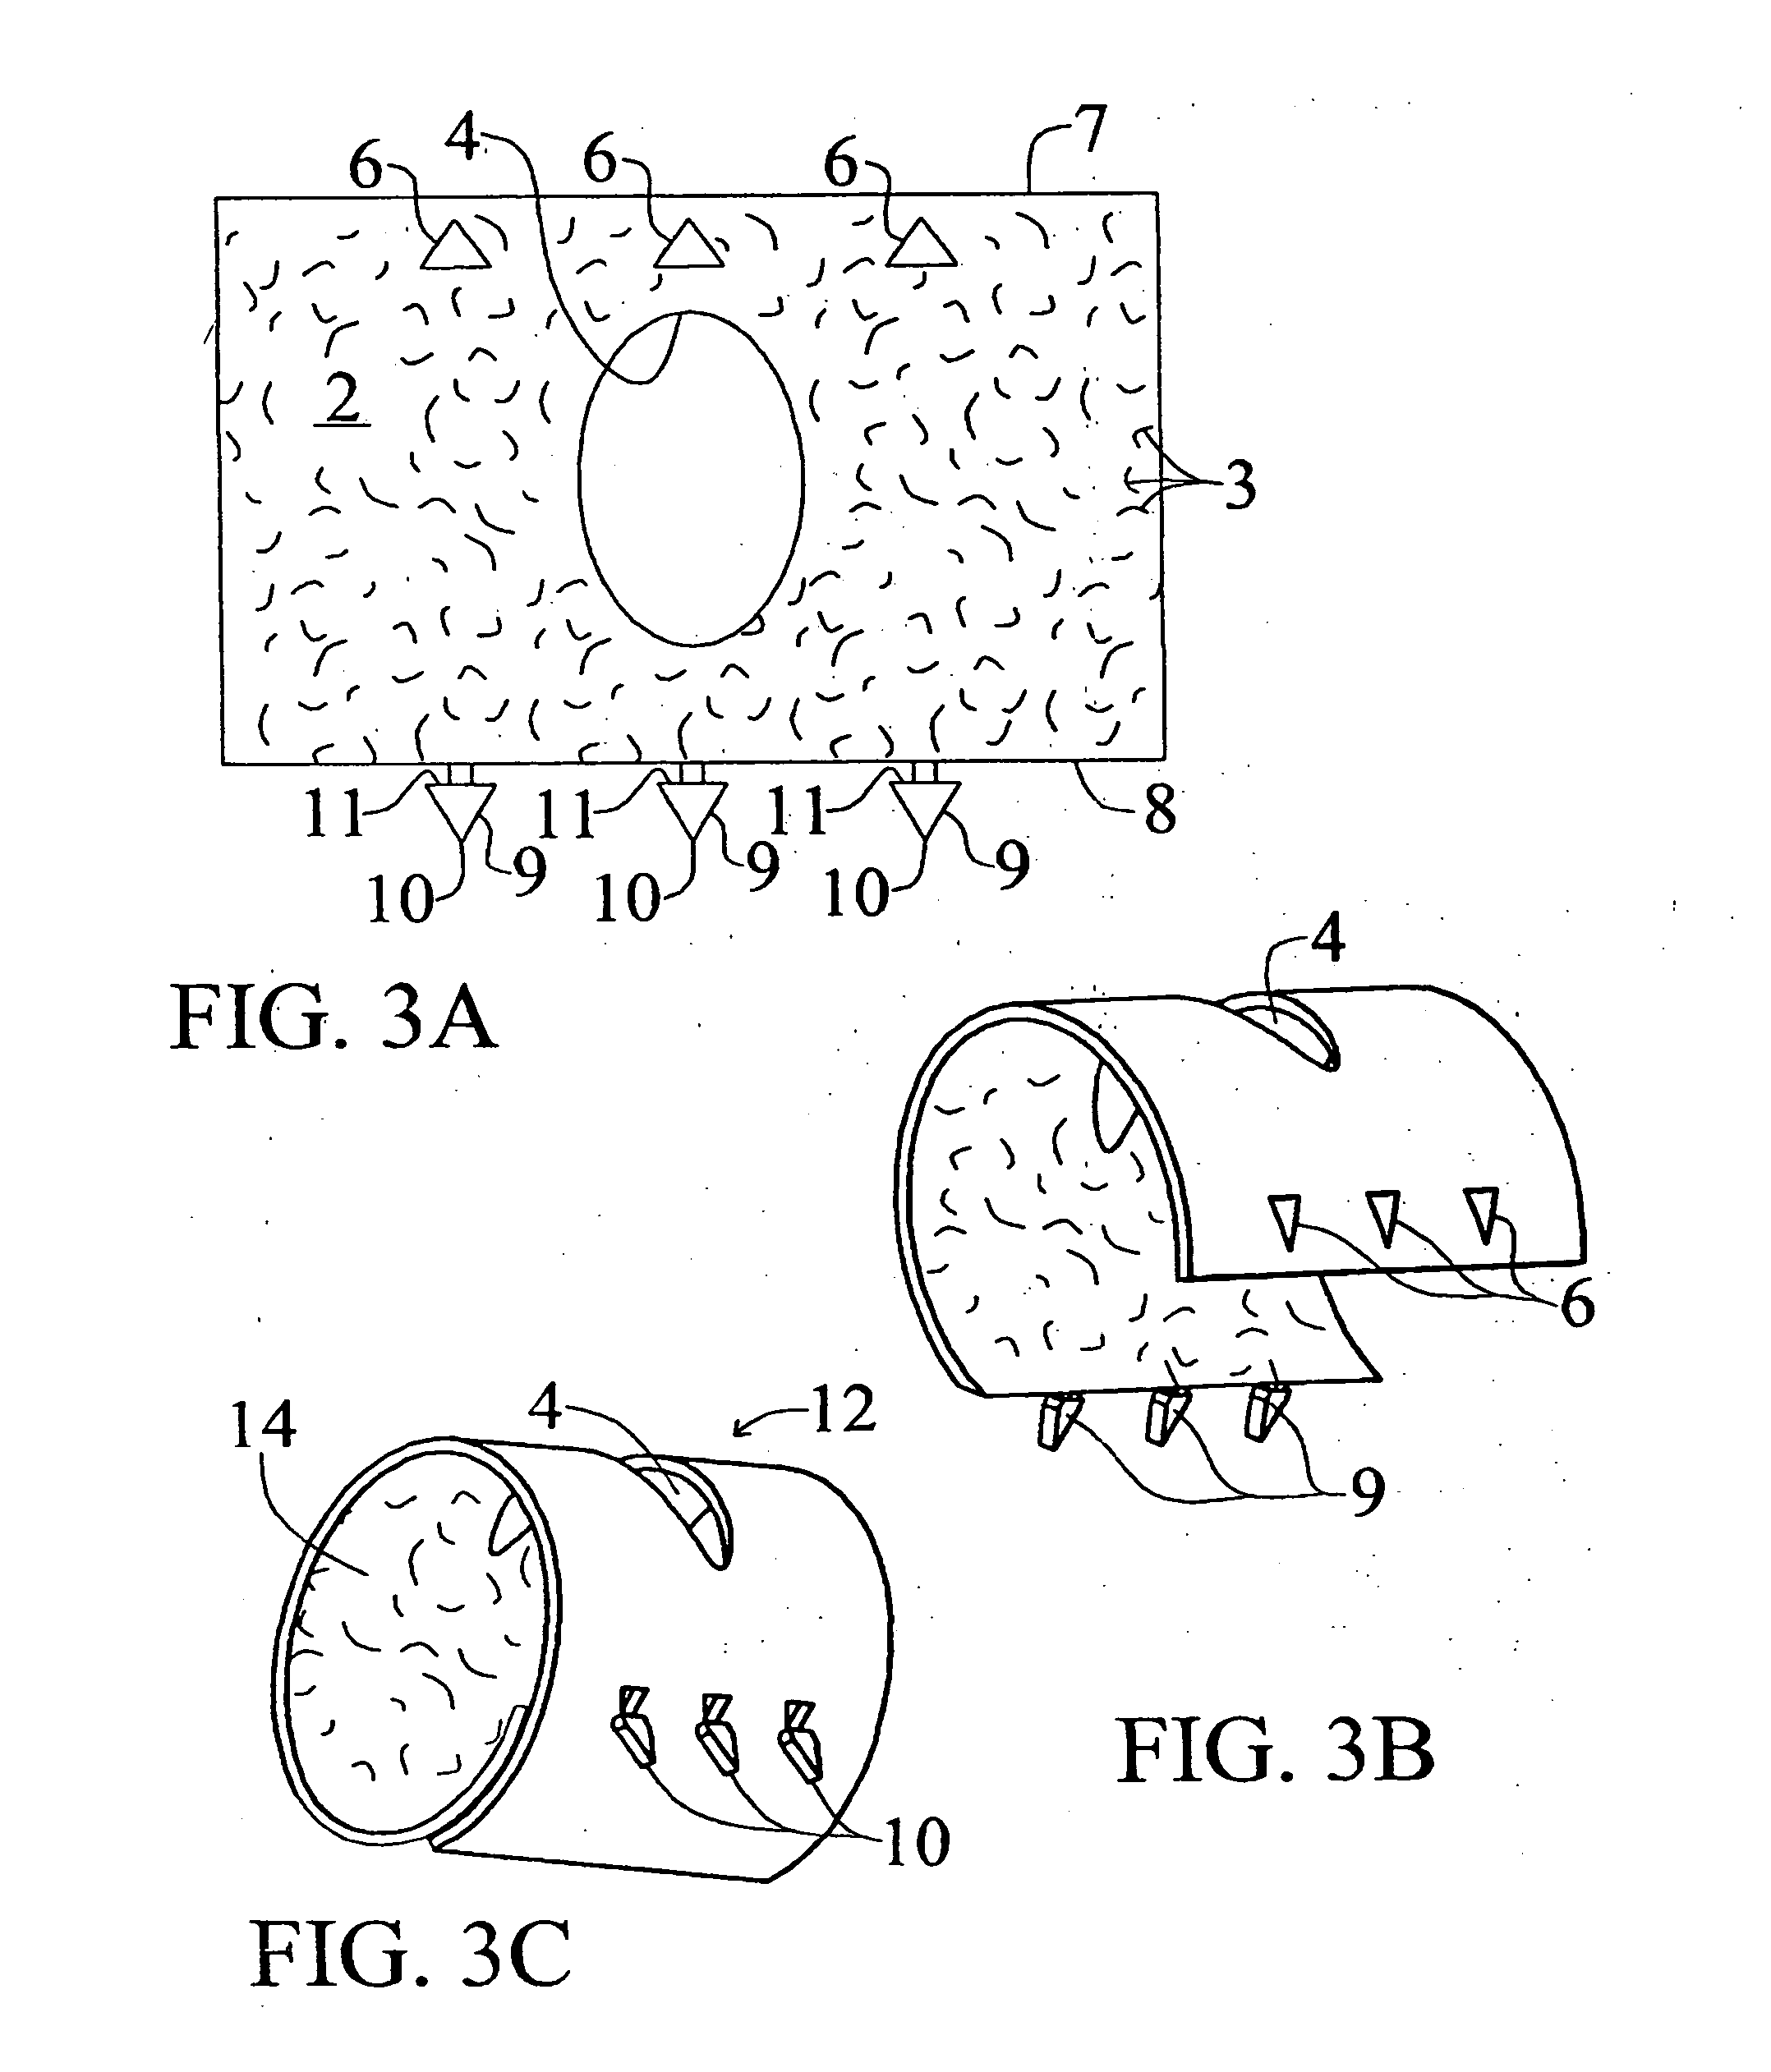 Medical implants and methods for regulating the tissue response to vascular closure devices